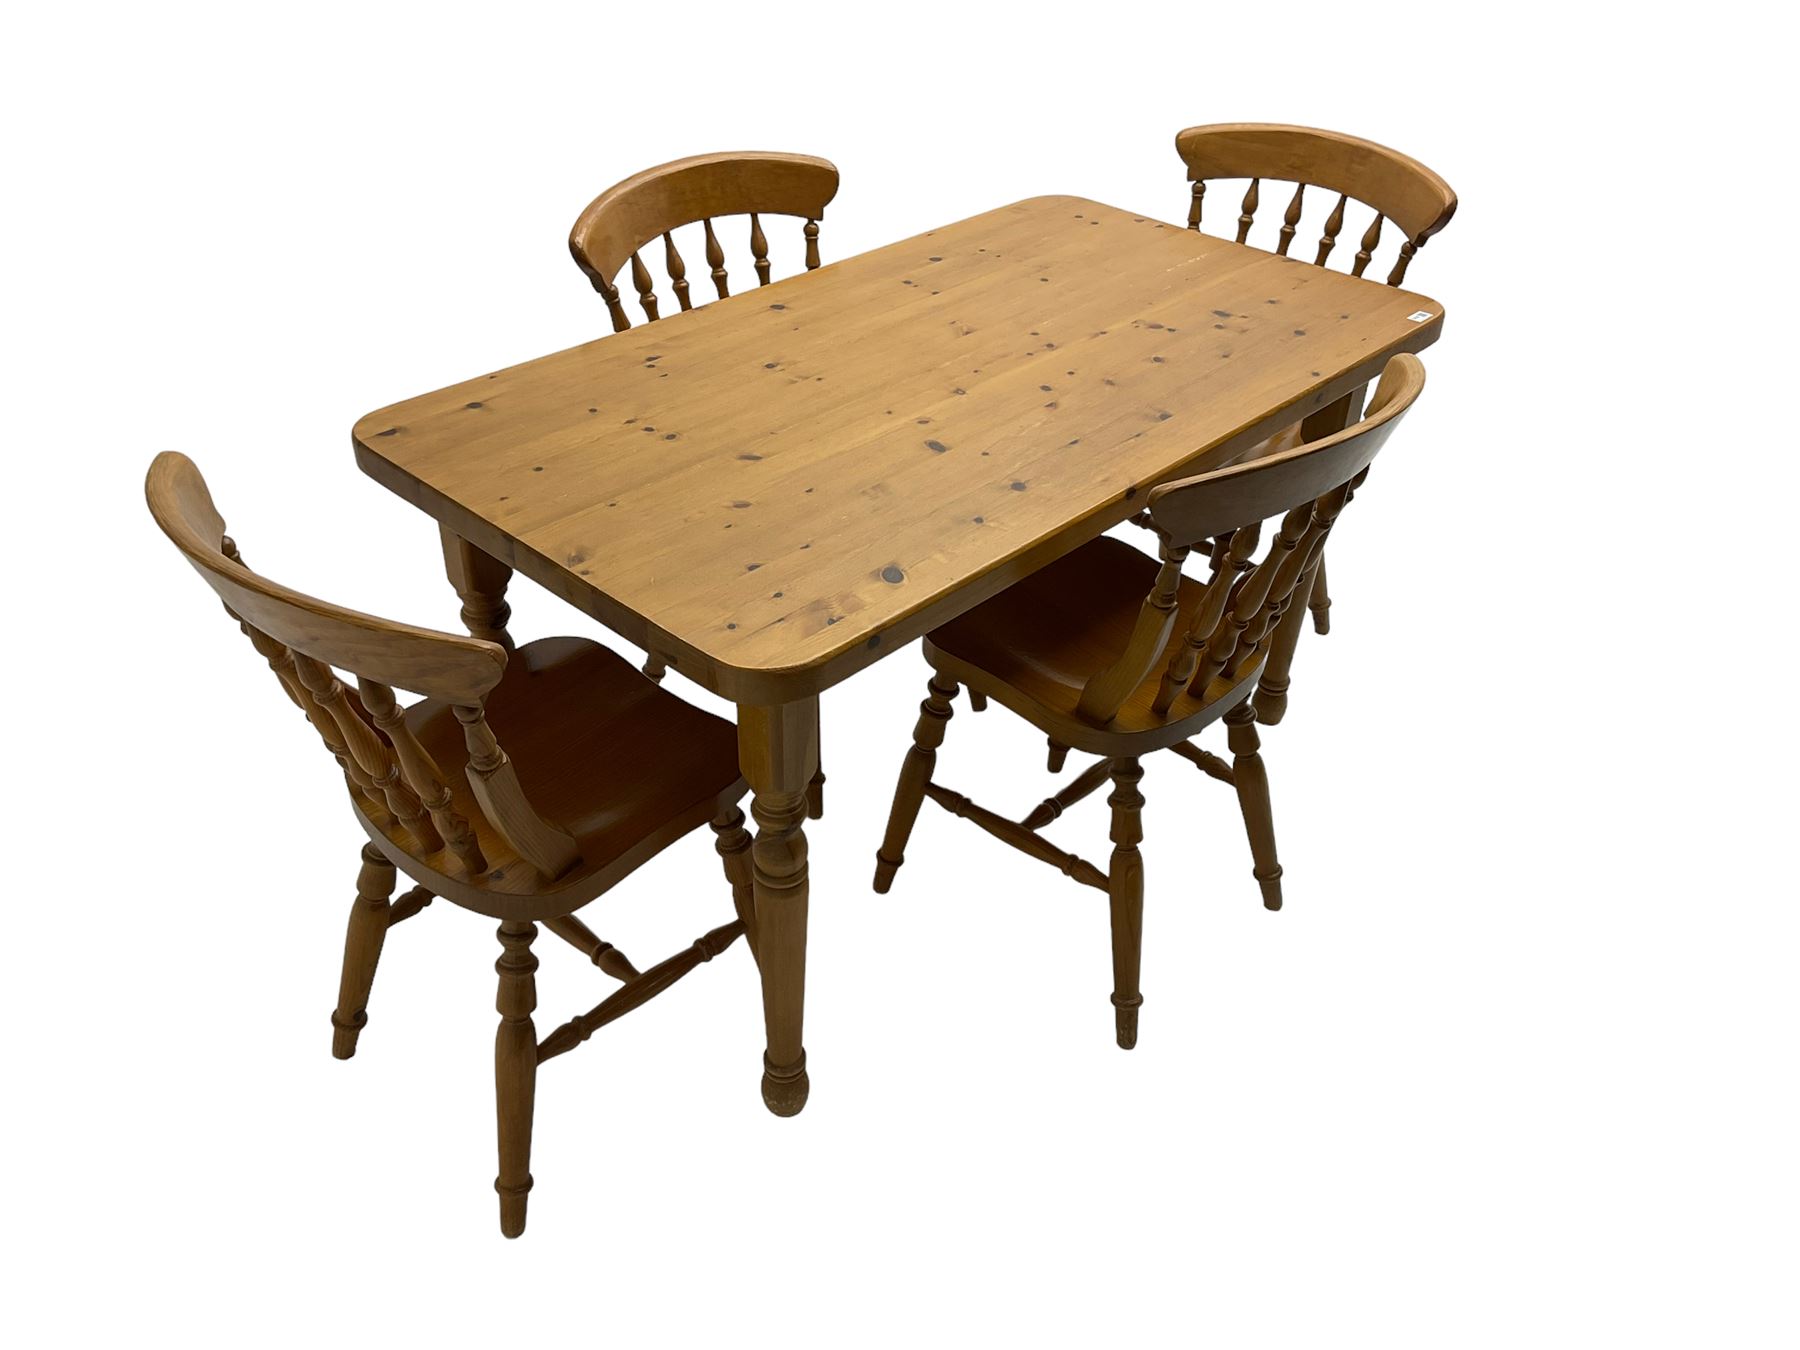 Traditional pine dining table - Image 6 of 6